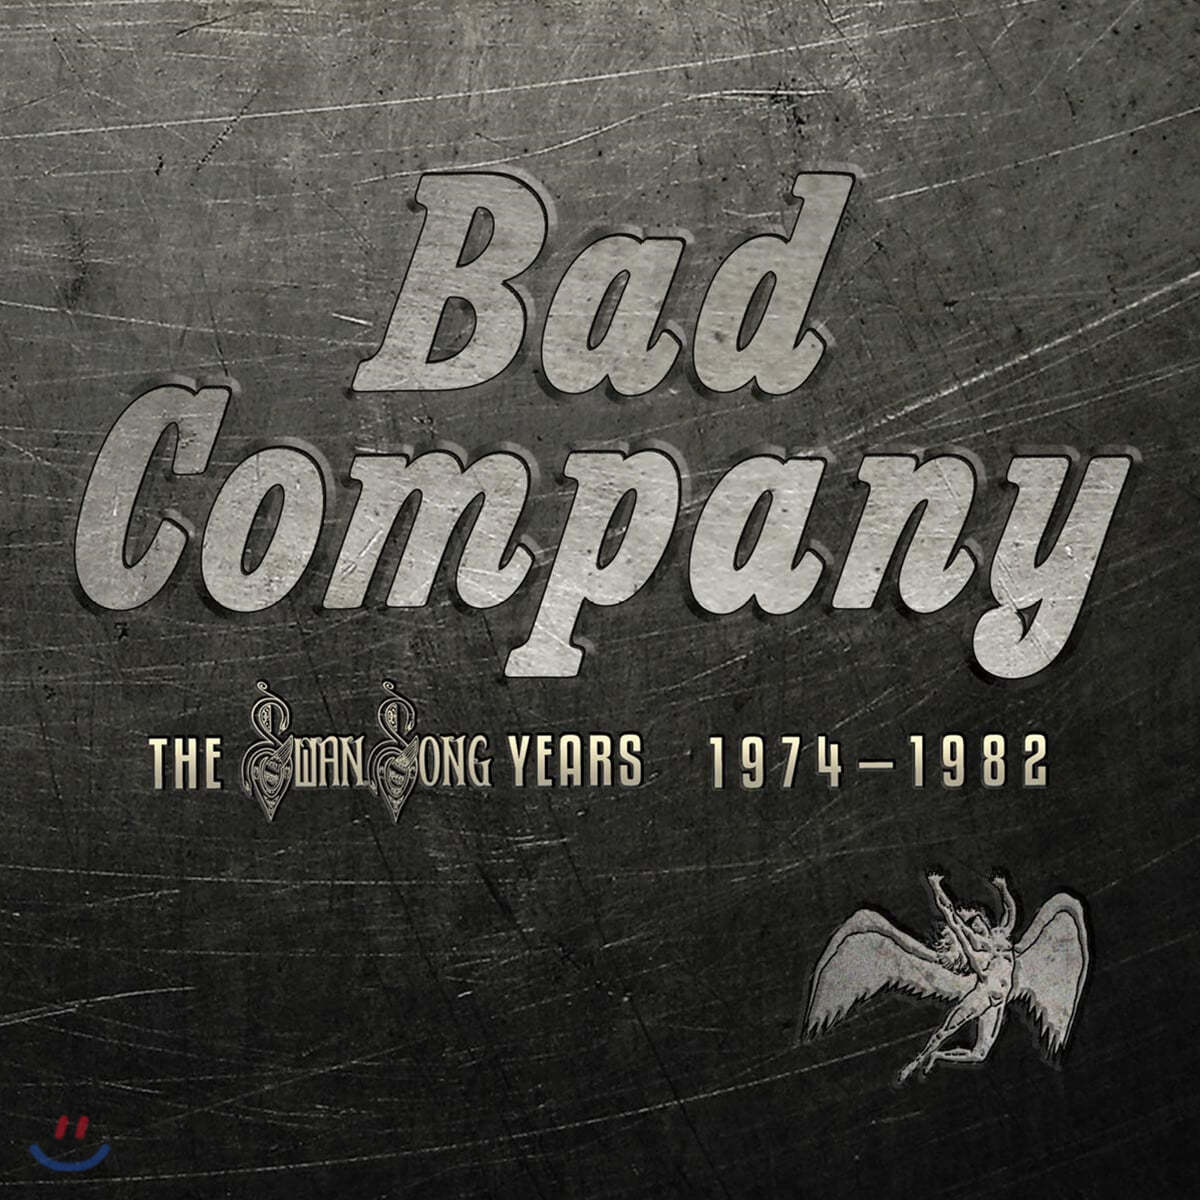 Bad Company (배드 컴퍼니) - Swan Song Years 1974-1982 (Deluxe Edition)